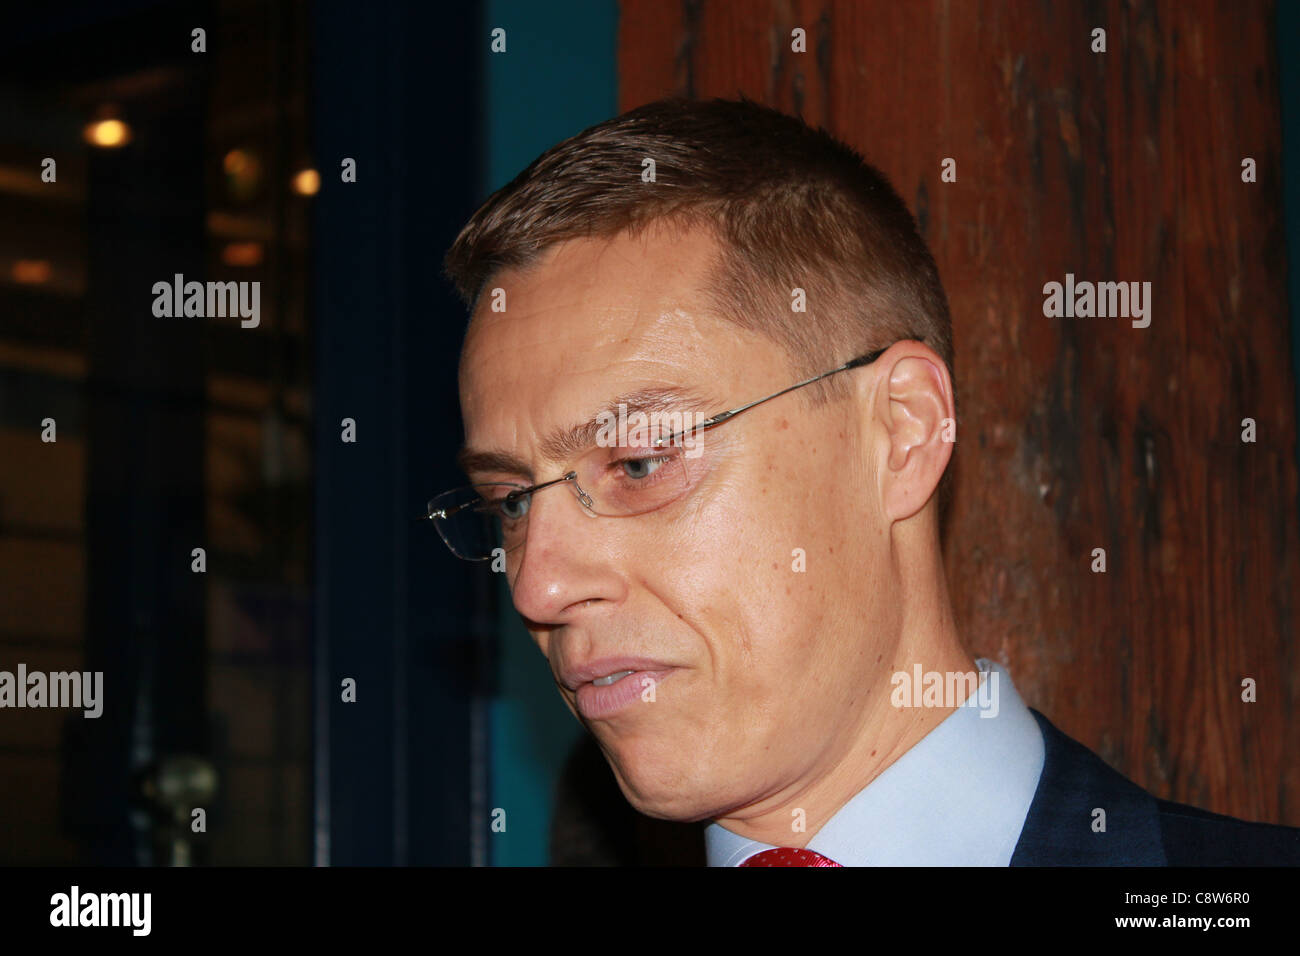 Copenhagen, Denmark, 02/11/2011. Minister for European Affairs and Foreign Trade of Finland  Alexander Stubb during Nordic Council session 2011  in Copenhagen, Denmark. Stubb made scandal headlines In Finnish media because use of swear words 'Vittu mitä paskaa' after the meeting. Stock Photo